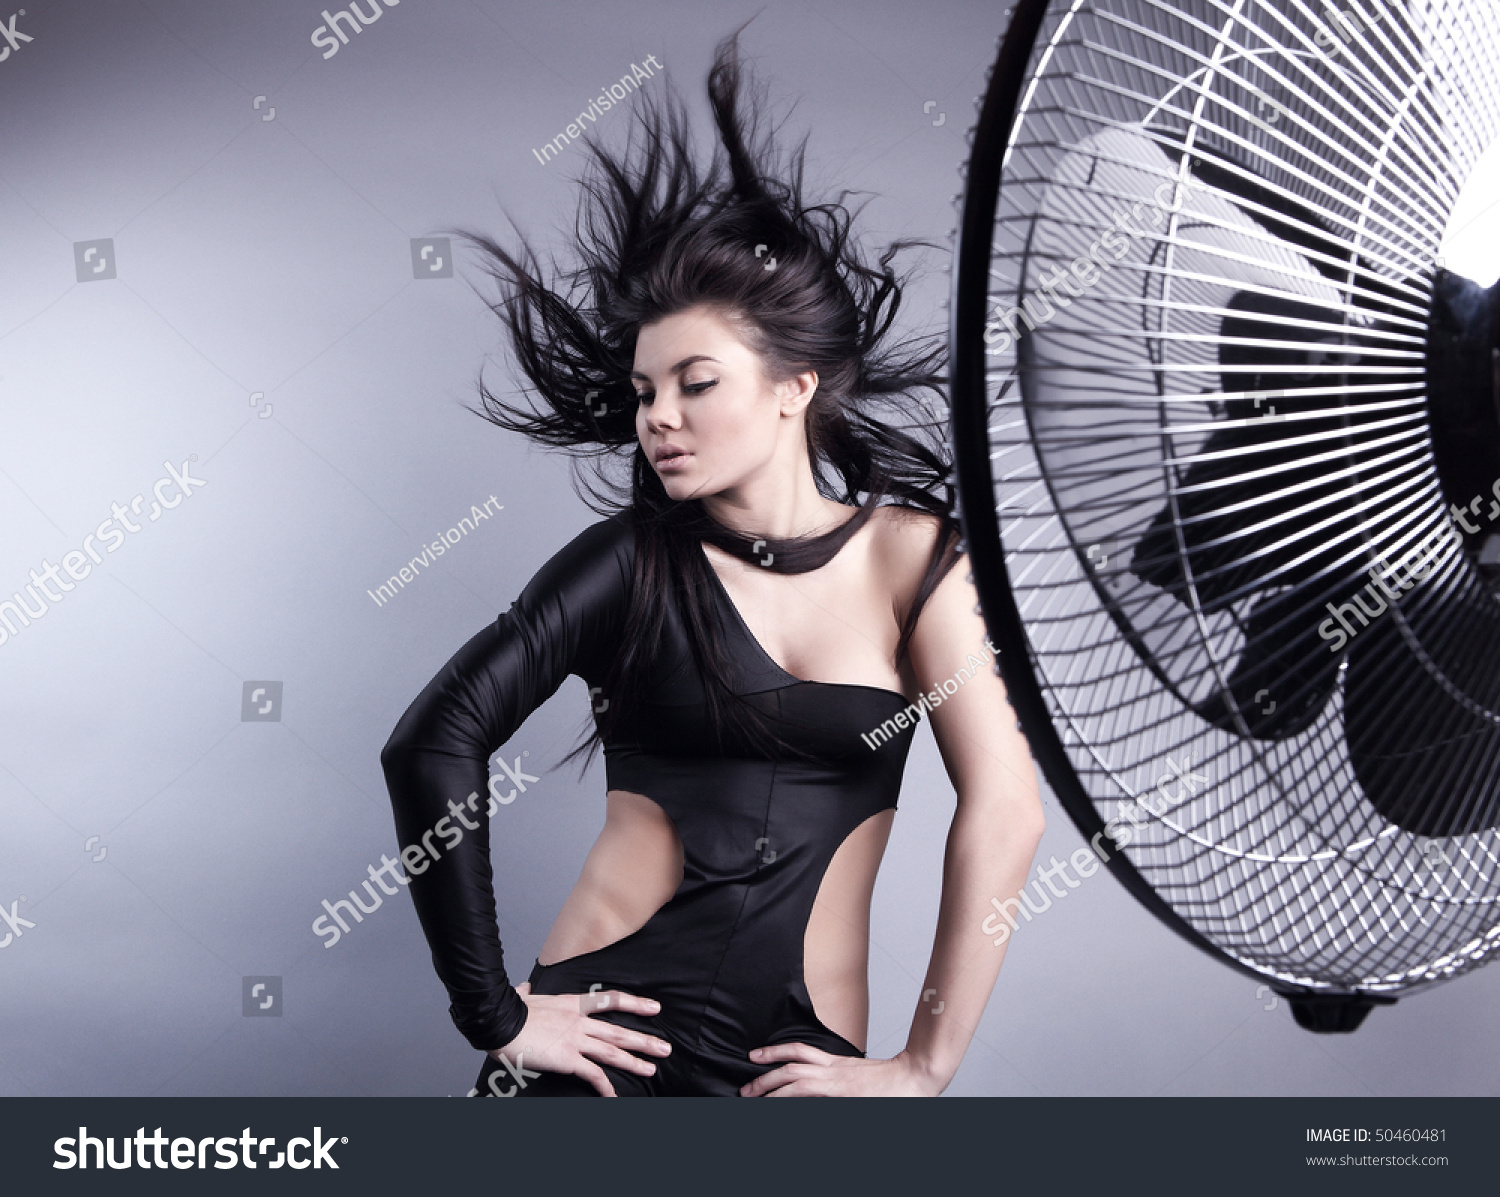 stock-photo-young-sexy-girl-in-front-of-blowing-fan-50460481.jpg